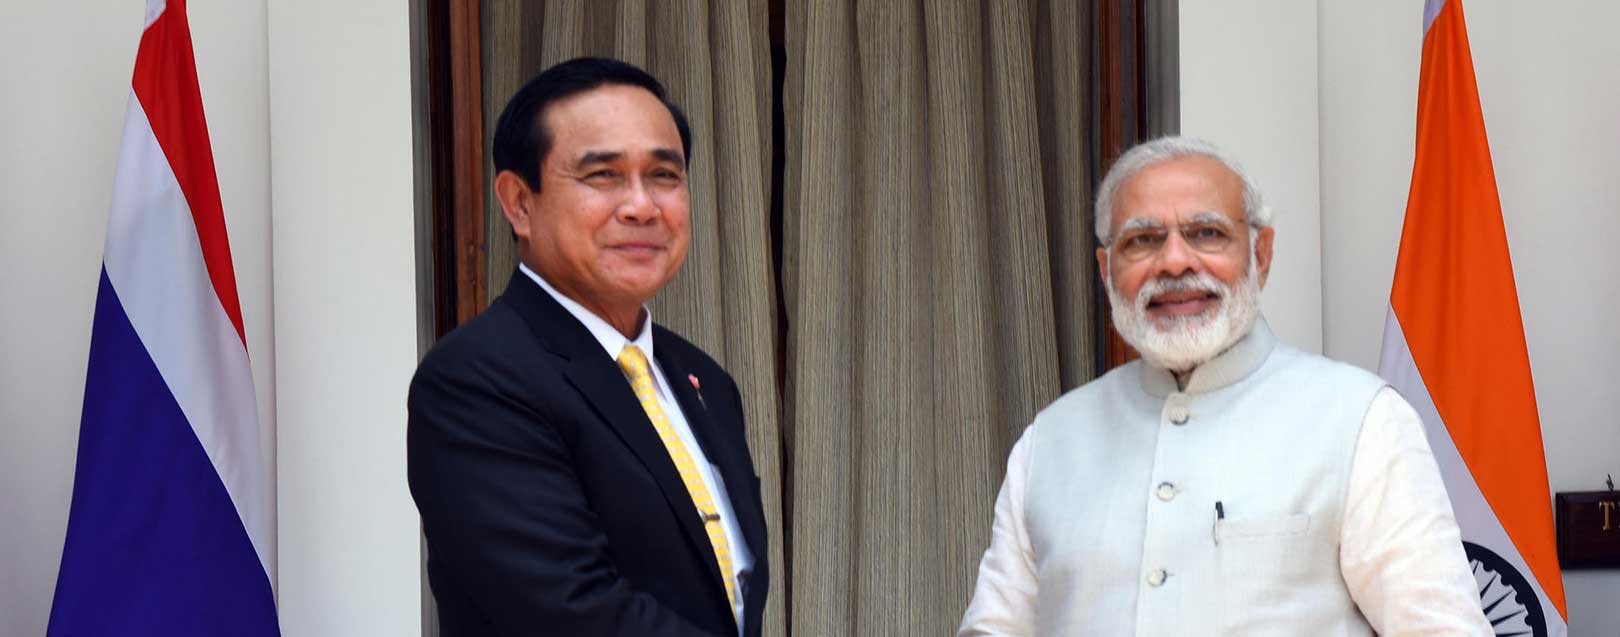 Thailand seeks to boost trade, investment with India